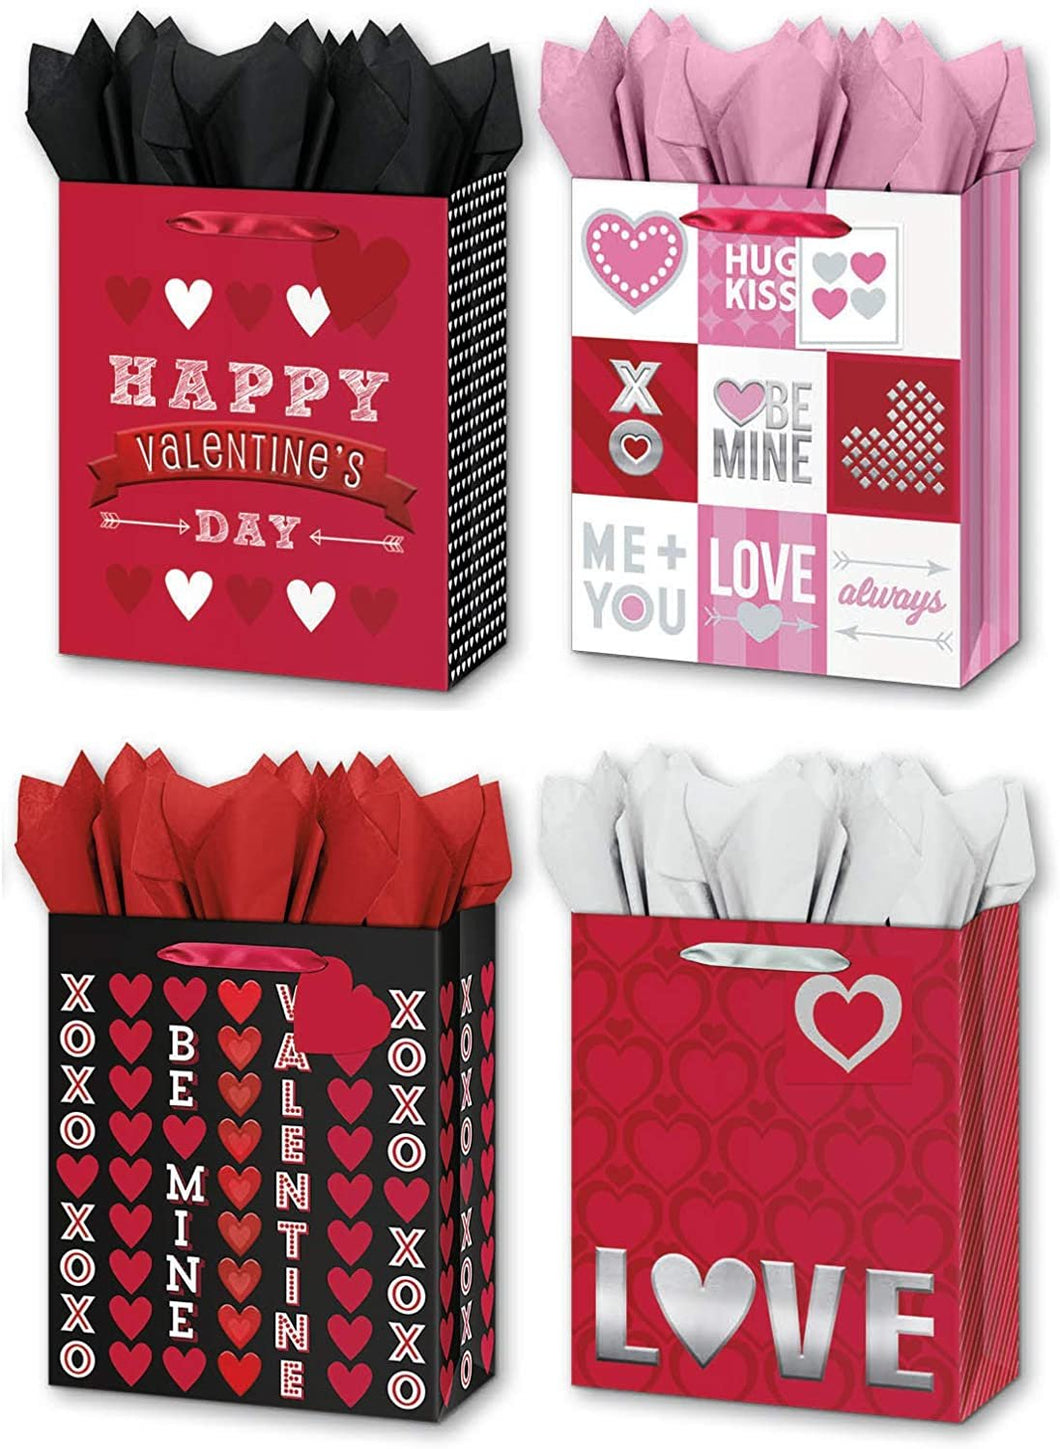 4 Large Valentines Day Gift Bags w/Tissue Paper Included Designed with - XOXO, Love, Be Mine, Hearts, & More